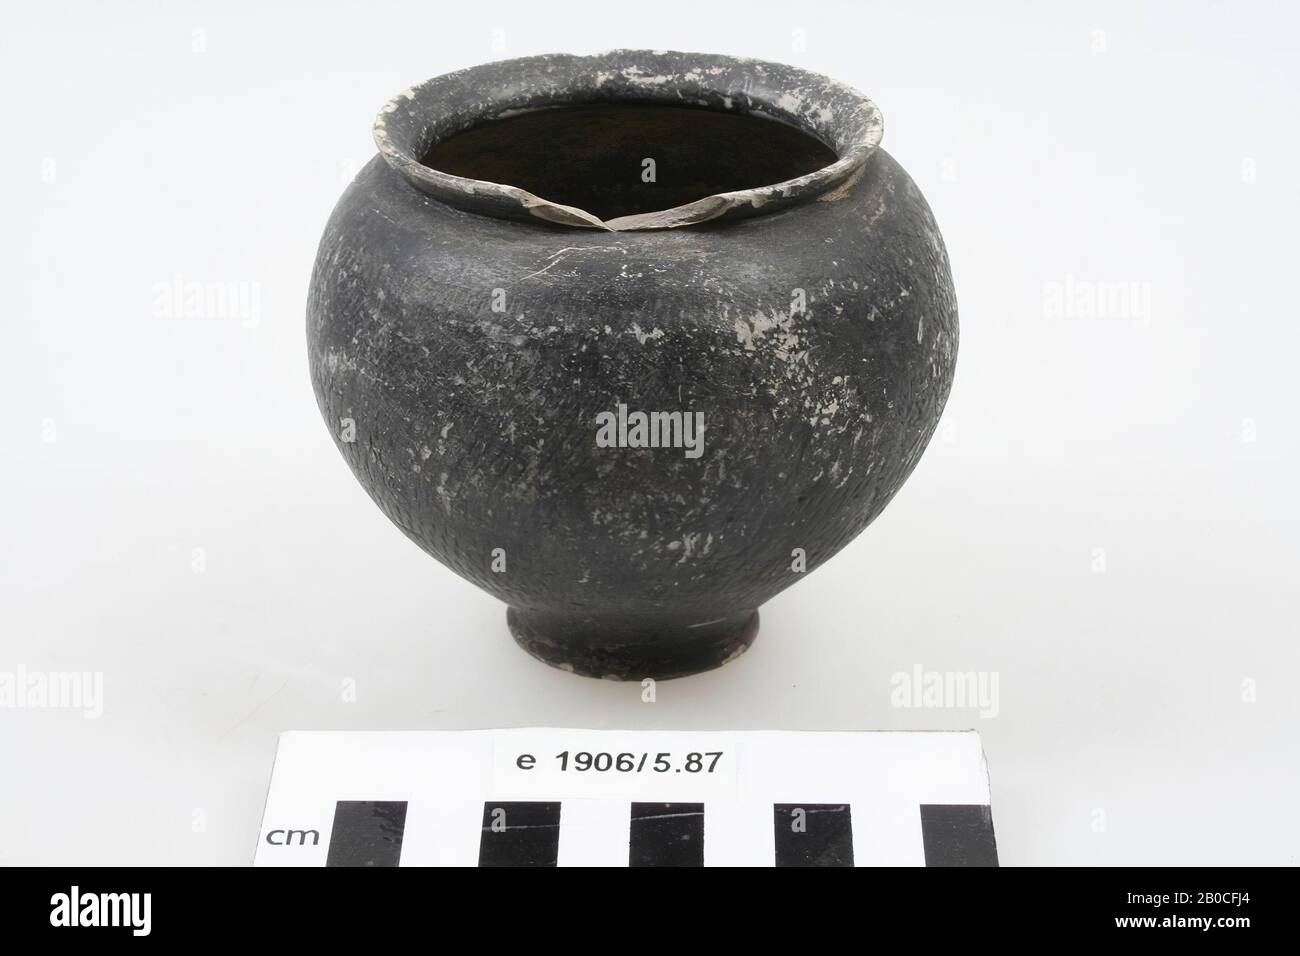 Urntje, pottery (black). With a hole in the bottom, a shard from the edge and wear spots on the urn itself., Urntje, pottery, h: 8.5 cm, diam: 10 cm, roman, Netherlands, Gelderland, Nijmegen, Nijmegen, Hees Stock Photo